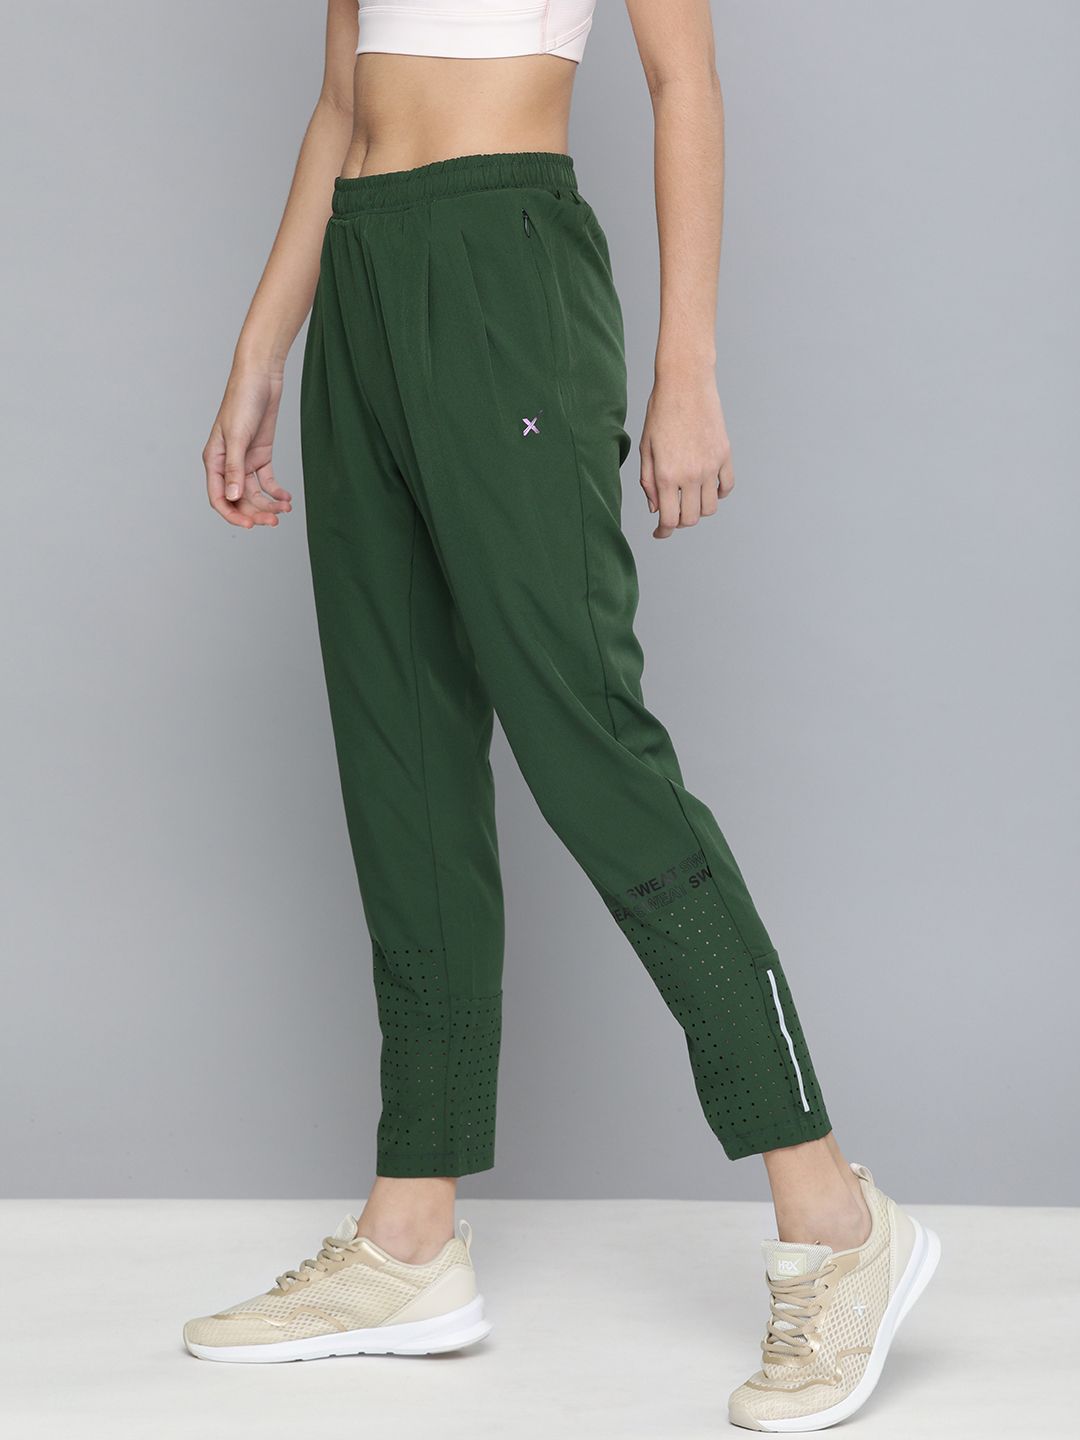 HRX by Hrithik Roshan Women Green solid Slim Rapid Dry Antimicrobial Training Track Pants Price in India